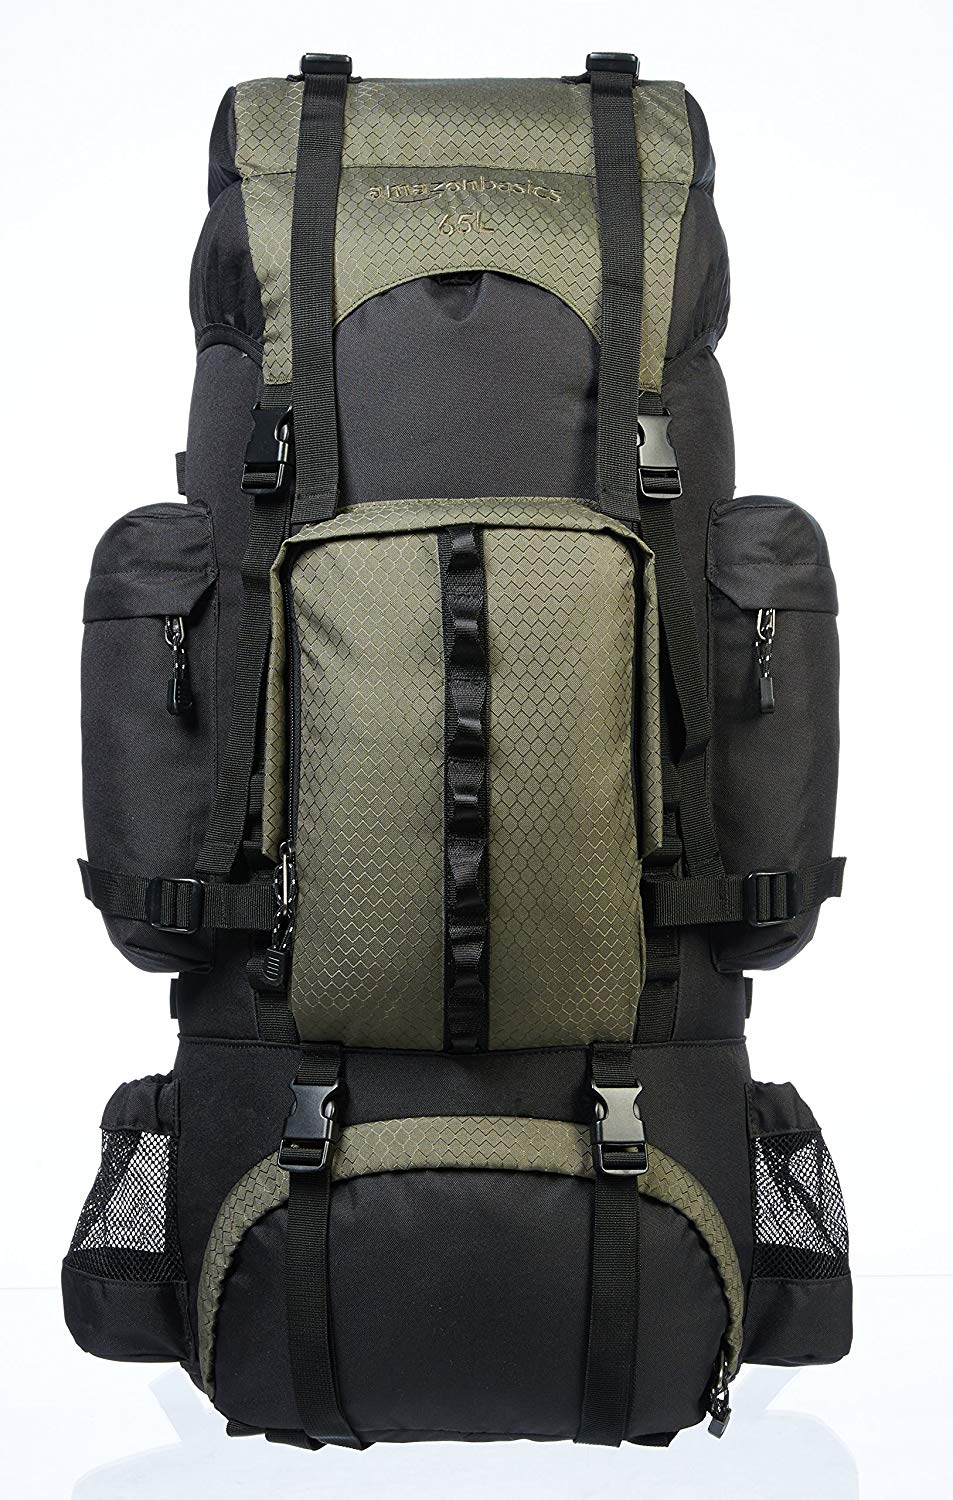 Best Camping Gifts 2022: Cheap Hiking Backpack